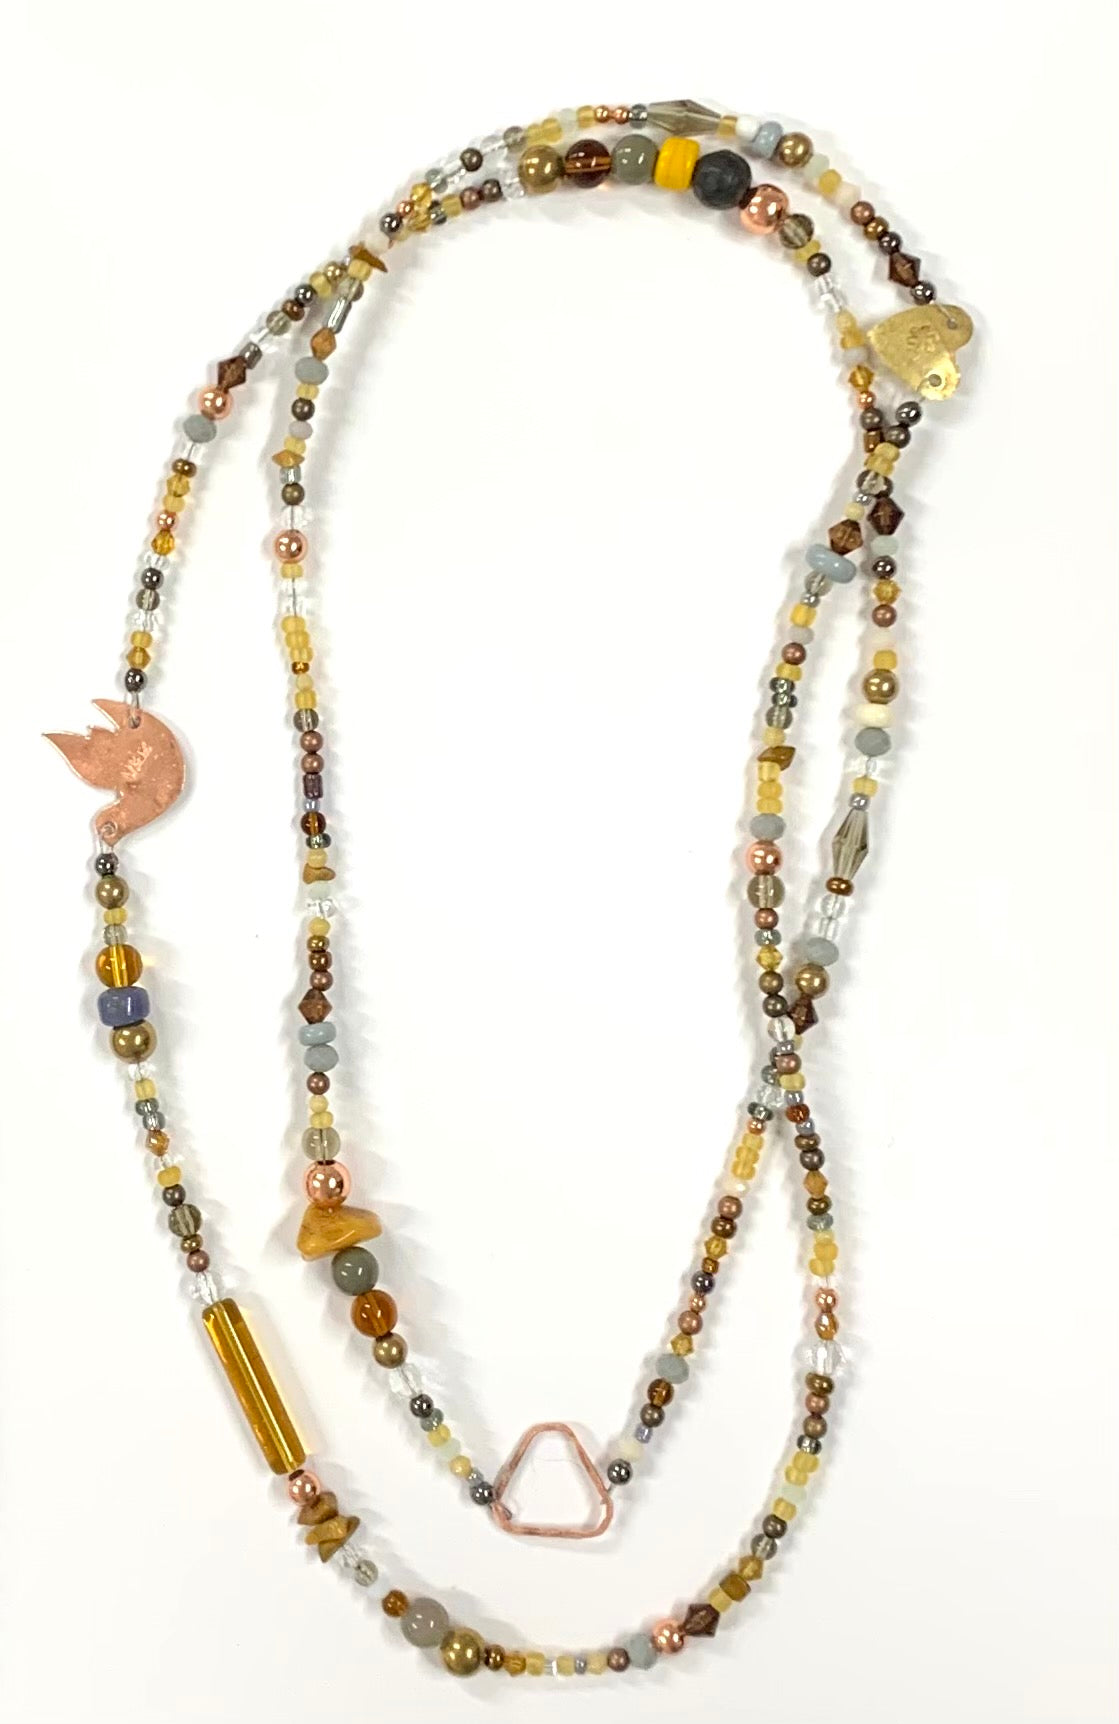 Long mustard and grey glass and metal beads